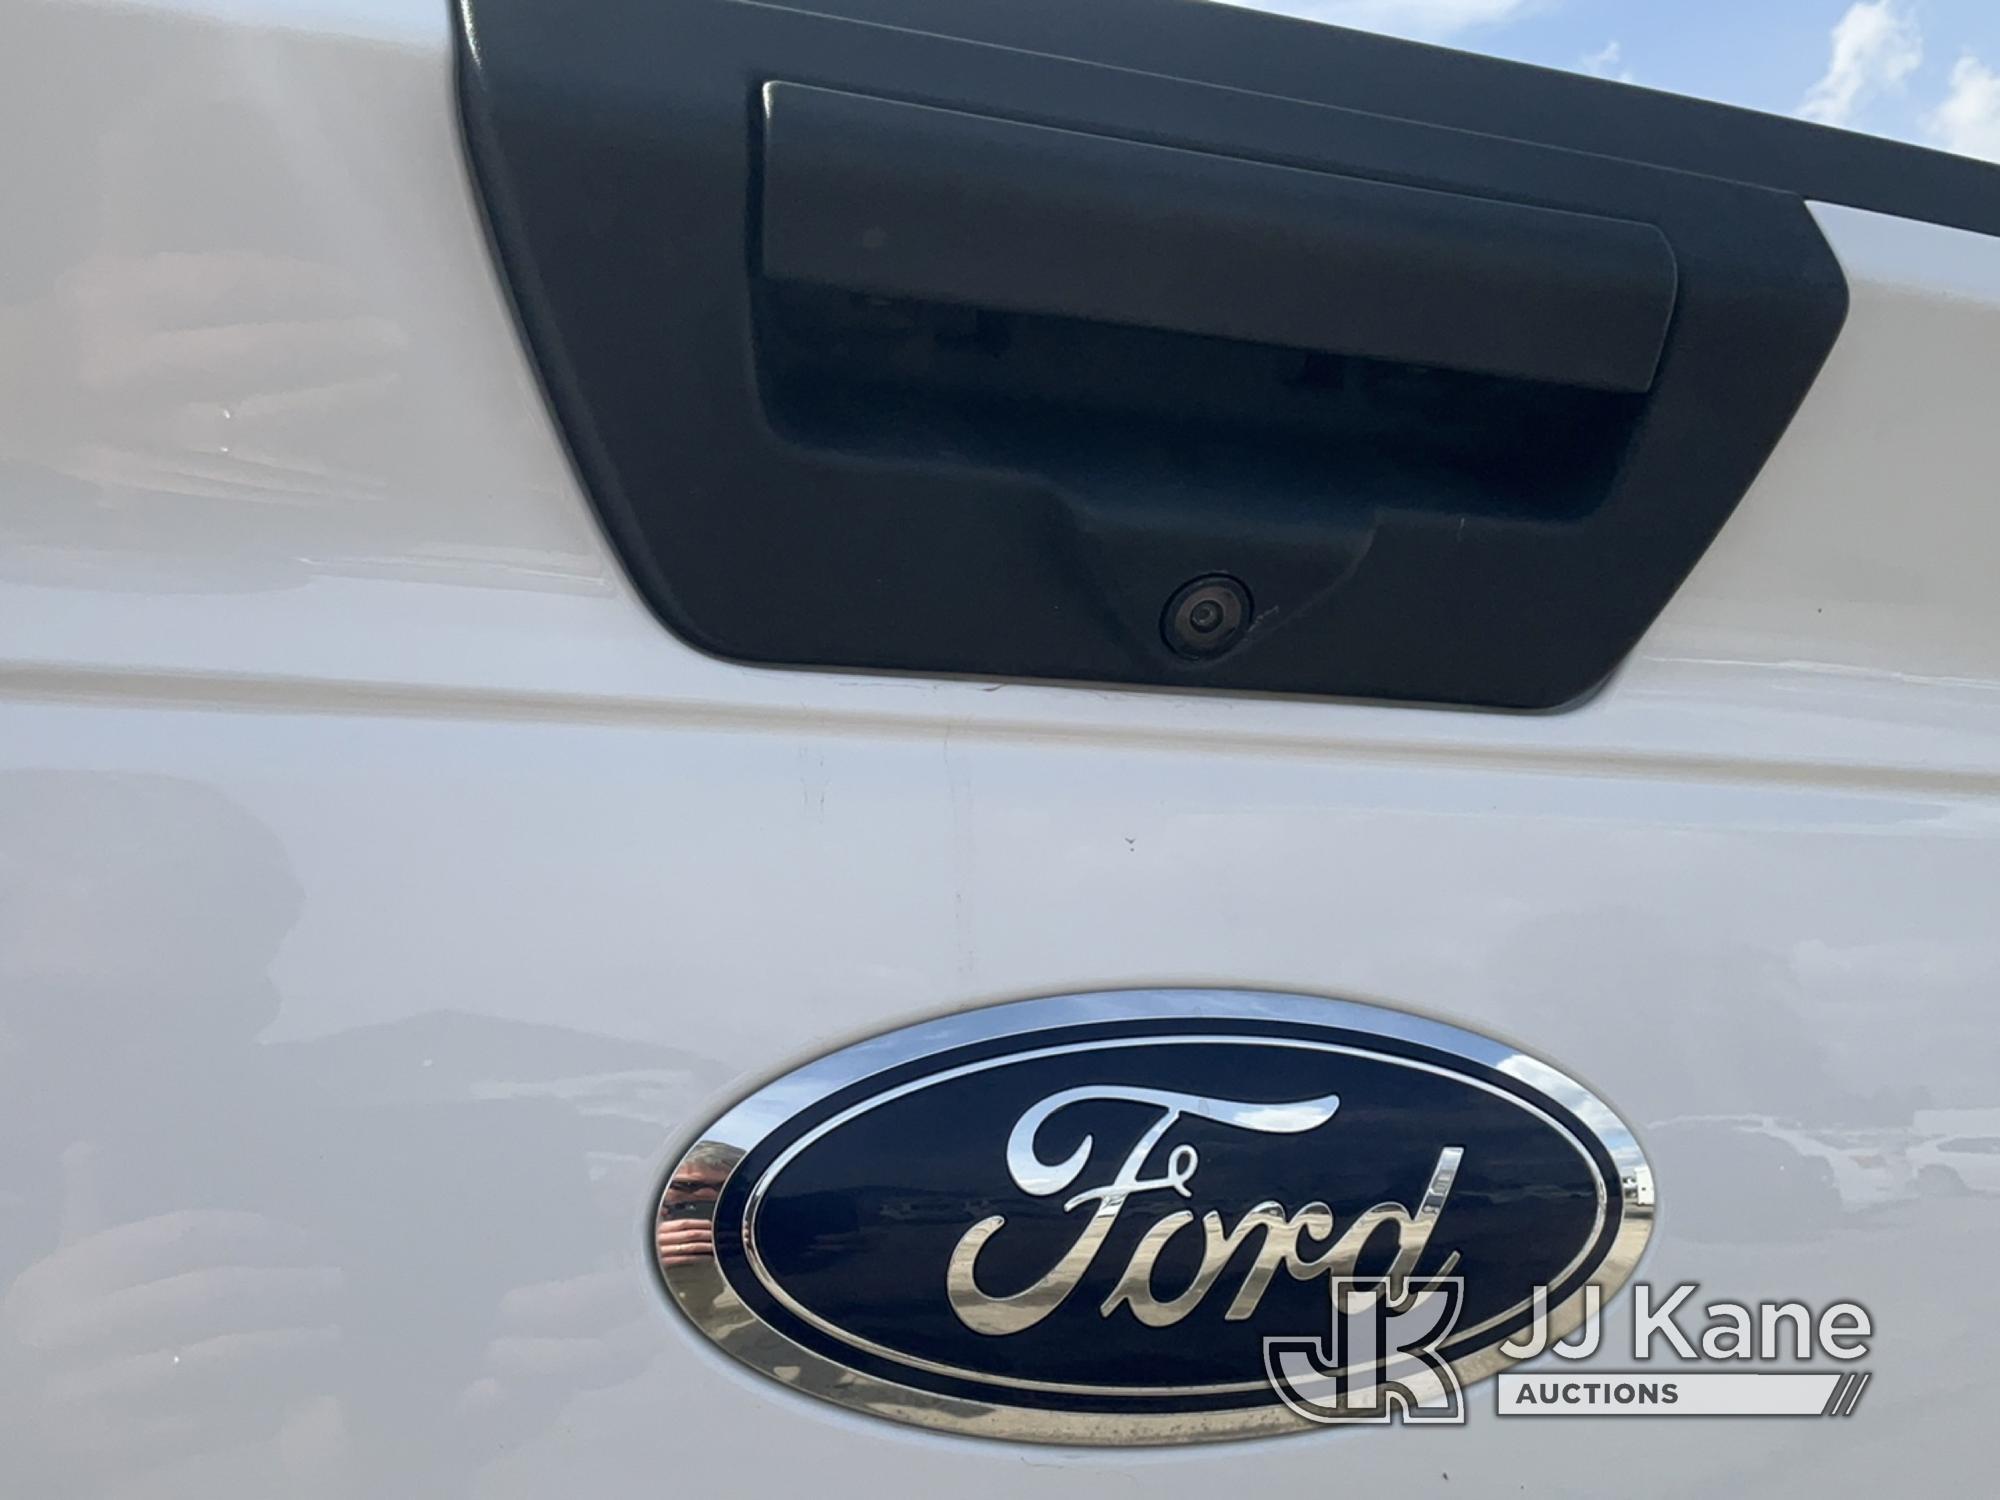 (South Beloit, IL) 2019 Ford F150 4x4 Extended-Cab Pickup Truck Runs, Moves, Engine Upper Noise-Cond